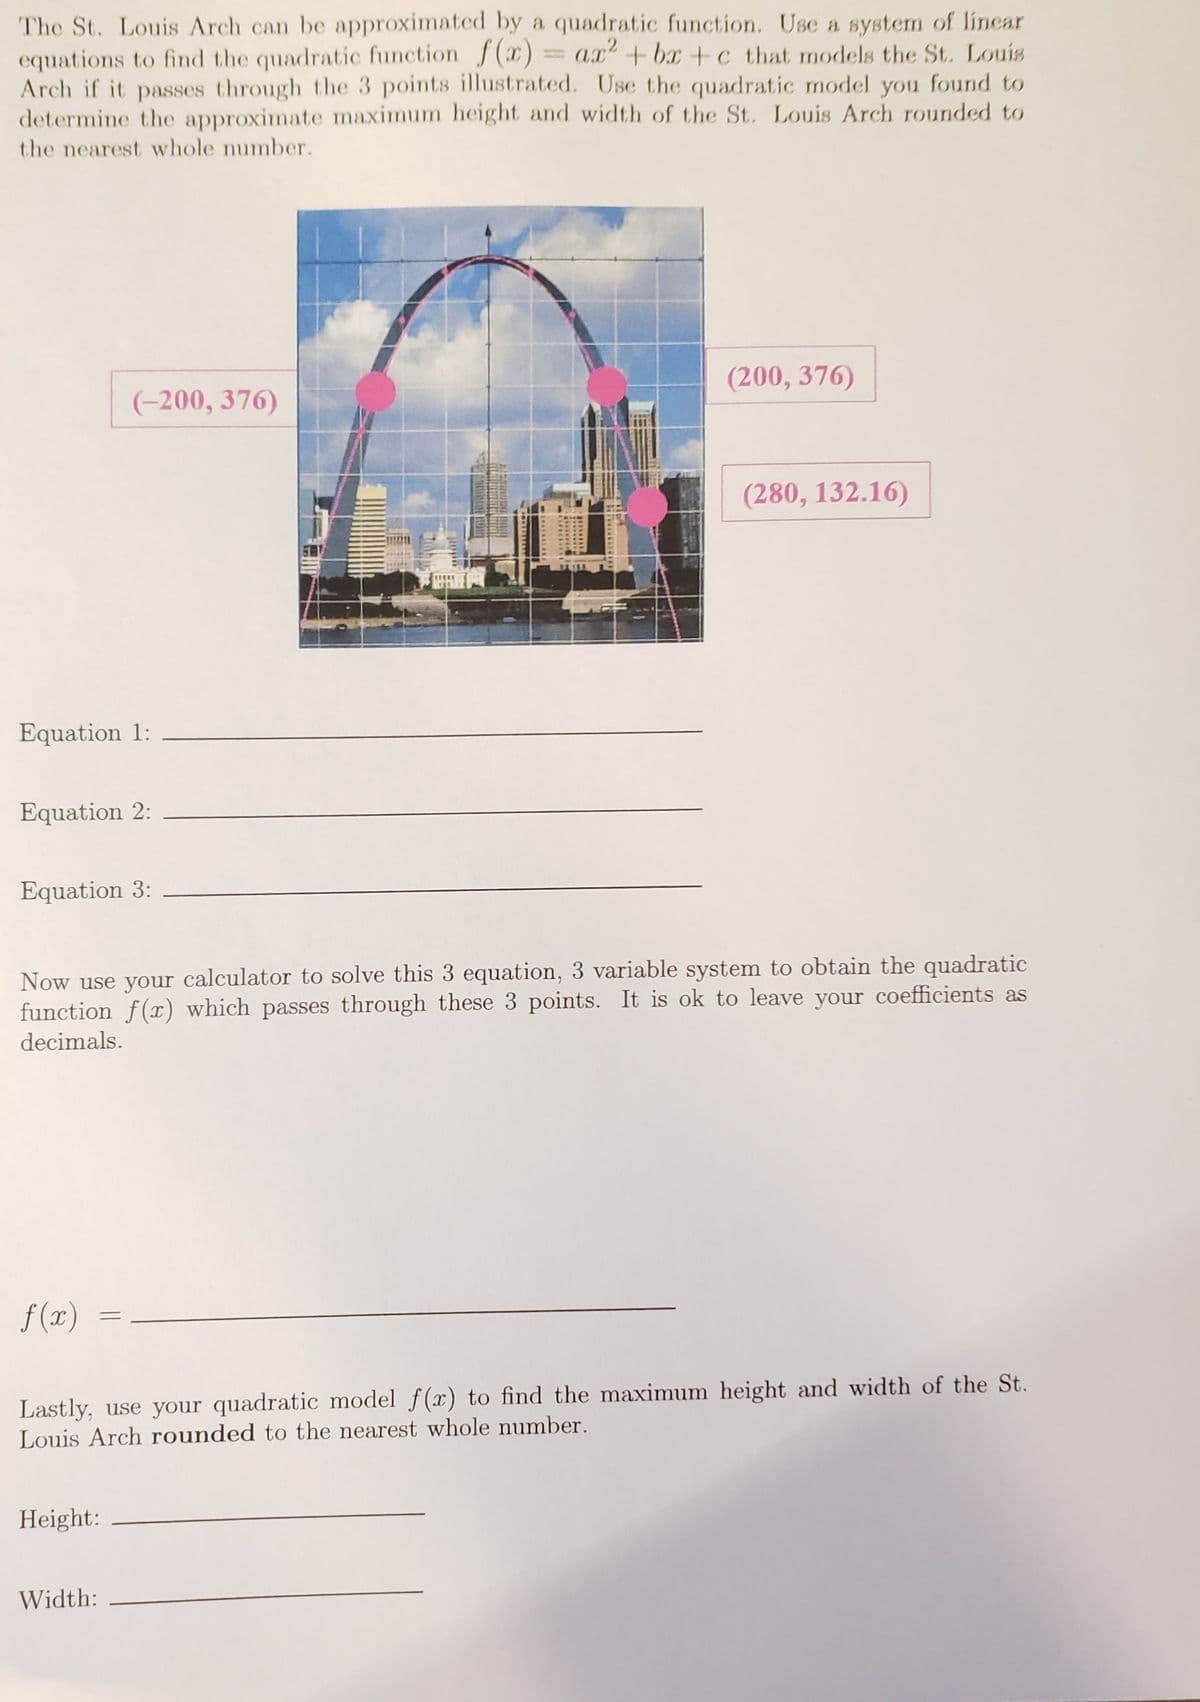 The St. Louis Arch can be approximated by a quadratic function. Use a system of linear
equations to find the quadratic function f(x)
Arch if it passes through the 3 points illustrated. Use the quadratic model you found to
determine the approximate maximum height and width of the St. Louis Arch rounded to
= ax+bx +c that models the St. Louis
%3D
the nearest whole number.
(200, 376)
(-200, 376)
(280, 132.16)
Equation 1:
Equation 2:
Equation 3:
Now use your calculator to solve this 3 equation, 3 variable system to obtain the quadratic
function f(x) which passes through these 3 points. It is ok to leave your coefficients as
decimals.
f (x)
%3D
Lastly, use your quadratic model f(x) to find the maximum height and width of the St.
Louis Arch rounded to the nearest whole number.
Height:
Width:
1OASDANONE
